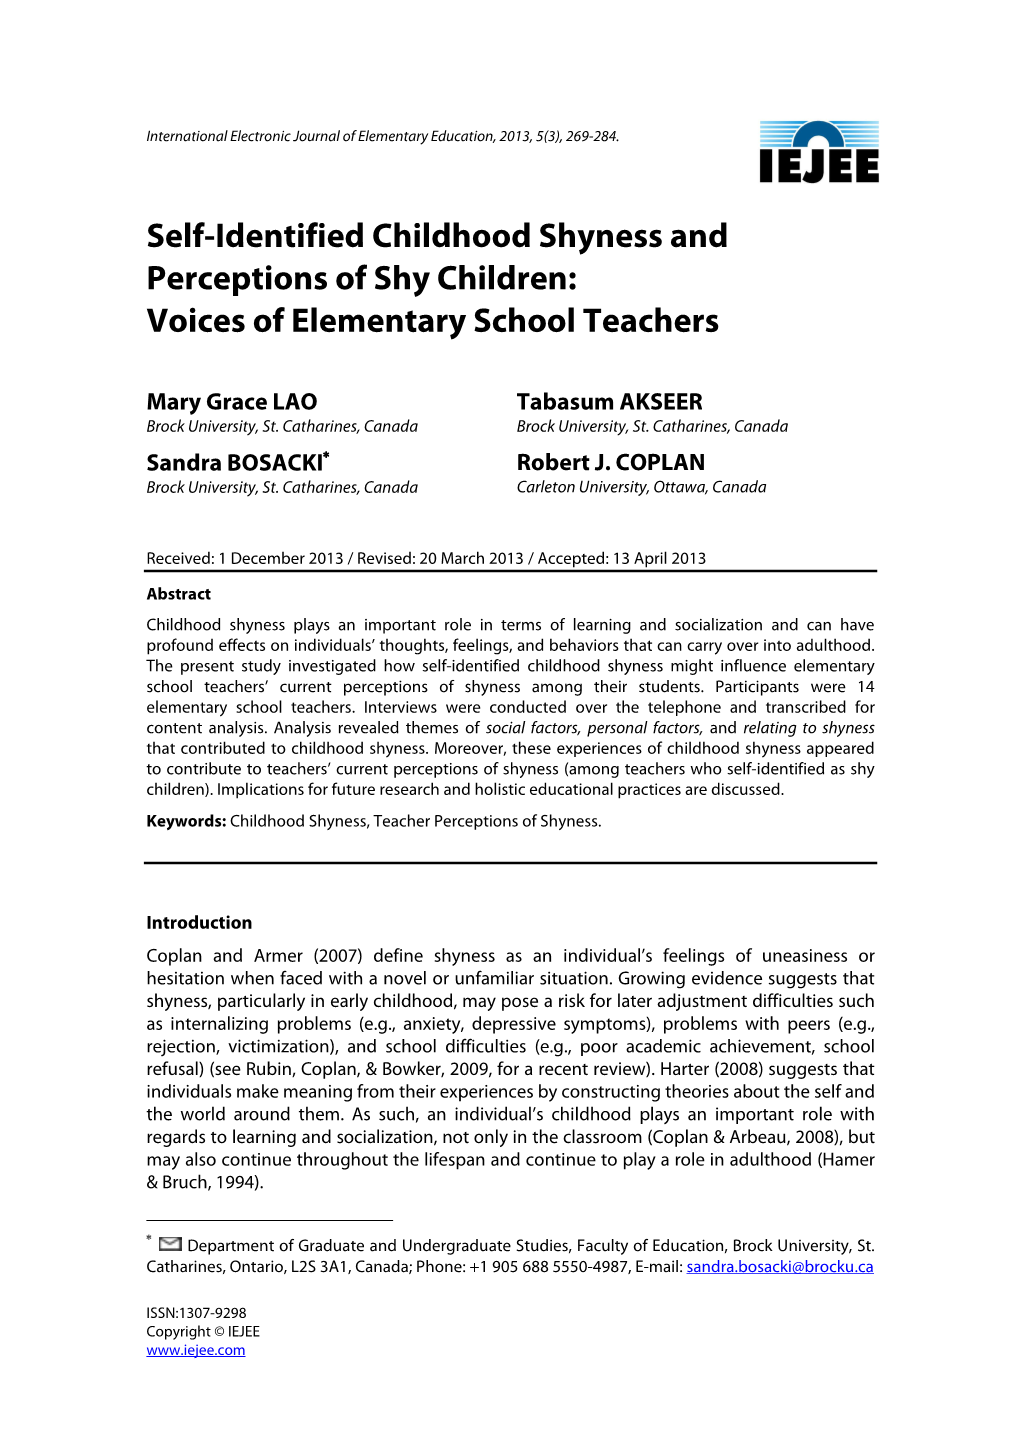 Self-Identified Childhood Shyness and Perceptions of Shy Children: Voices of Elementary School Teachers